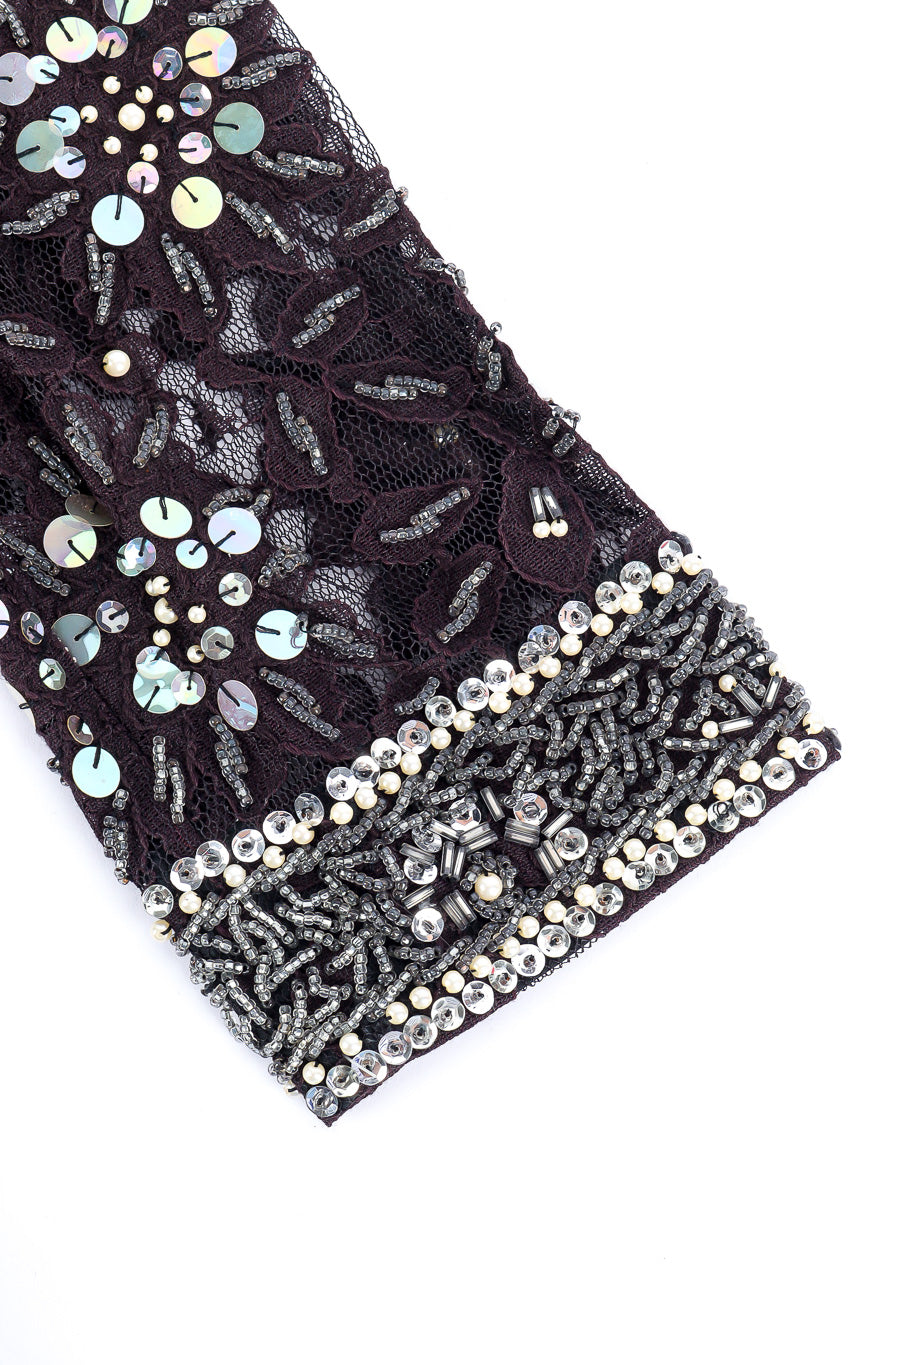 Vintage beaded and sequin lace set sleeve cuff details. @recesla